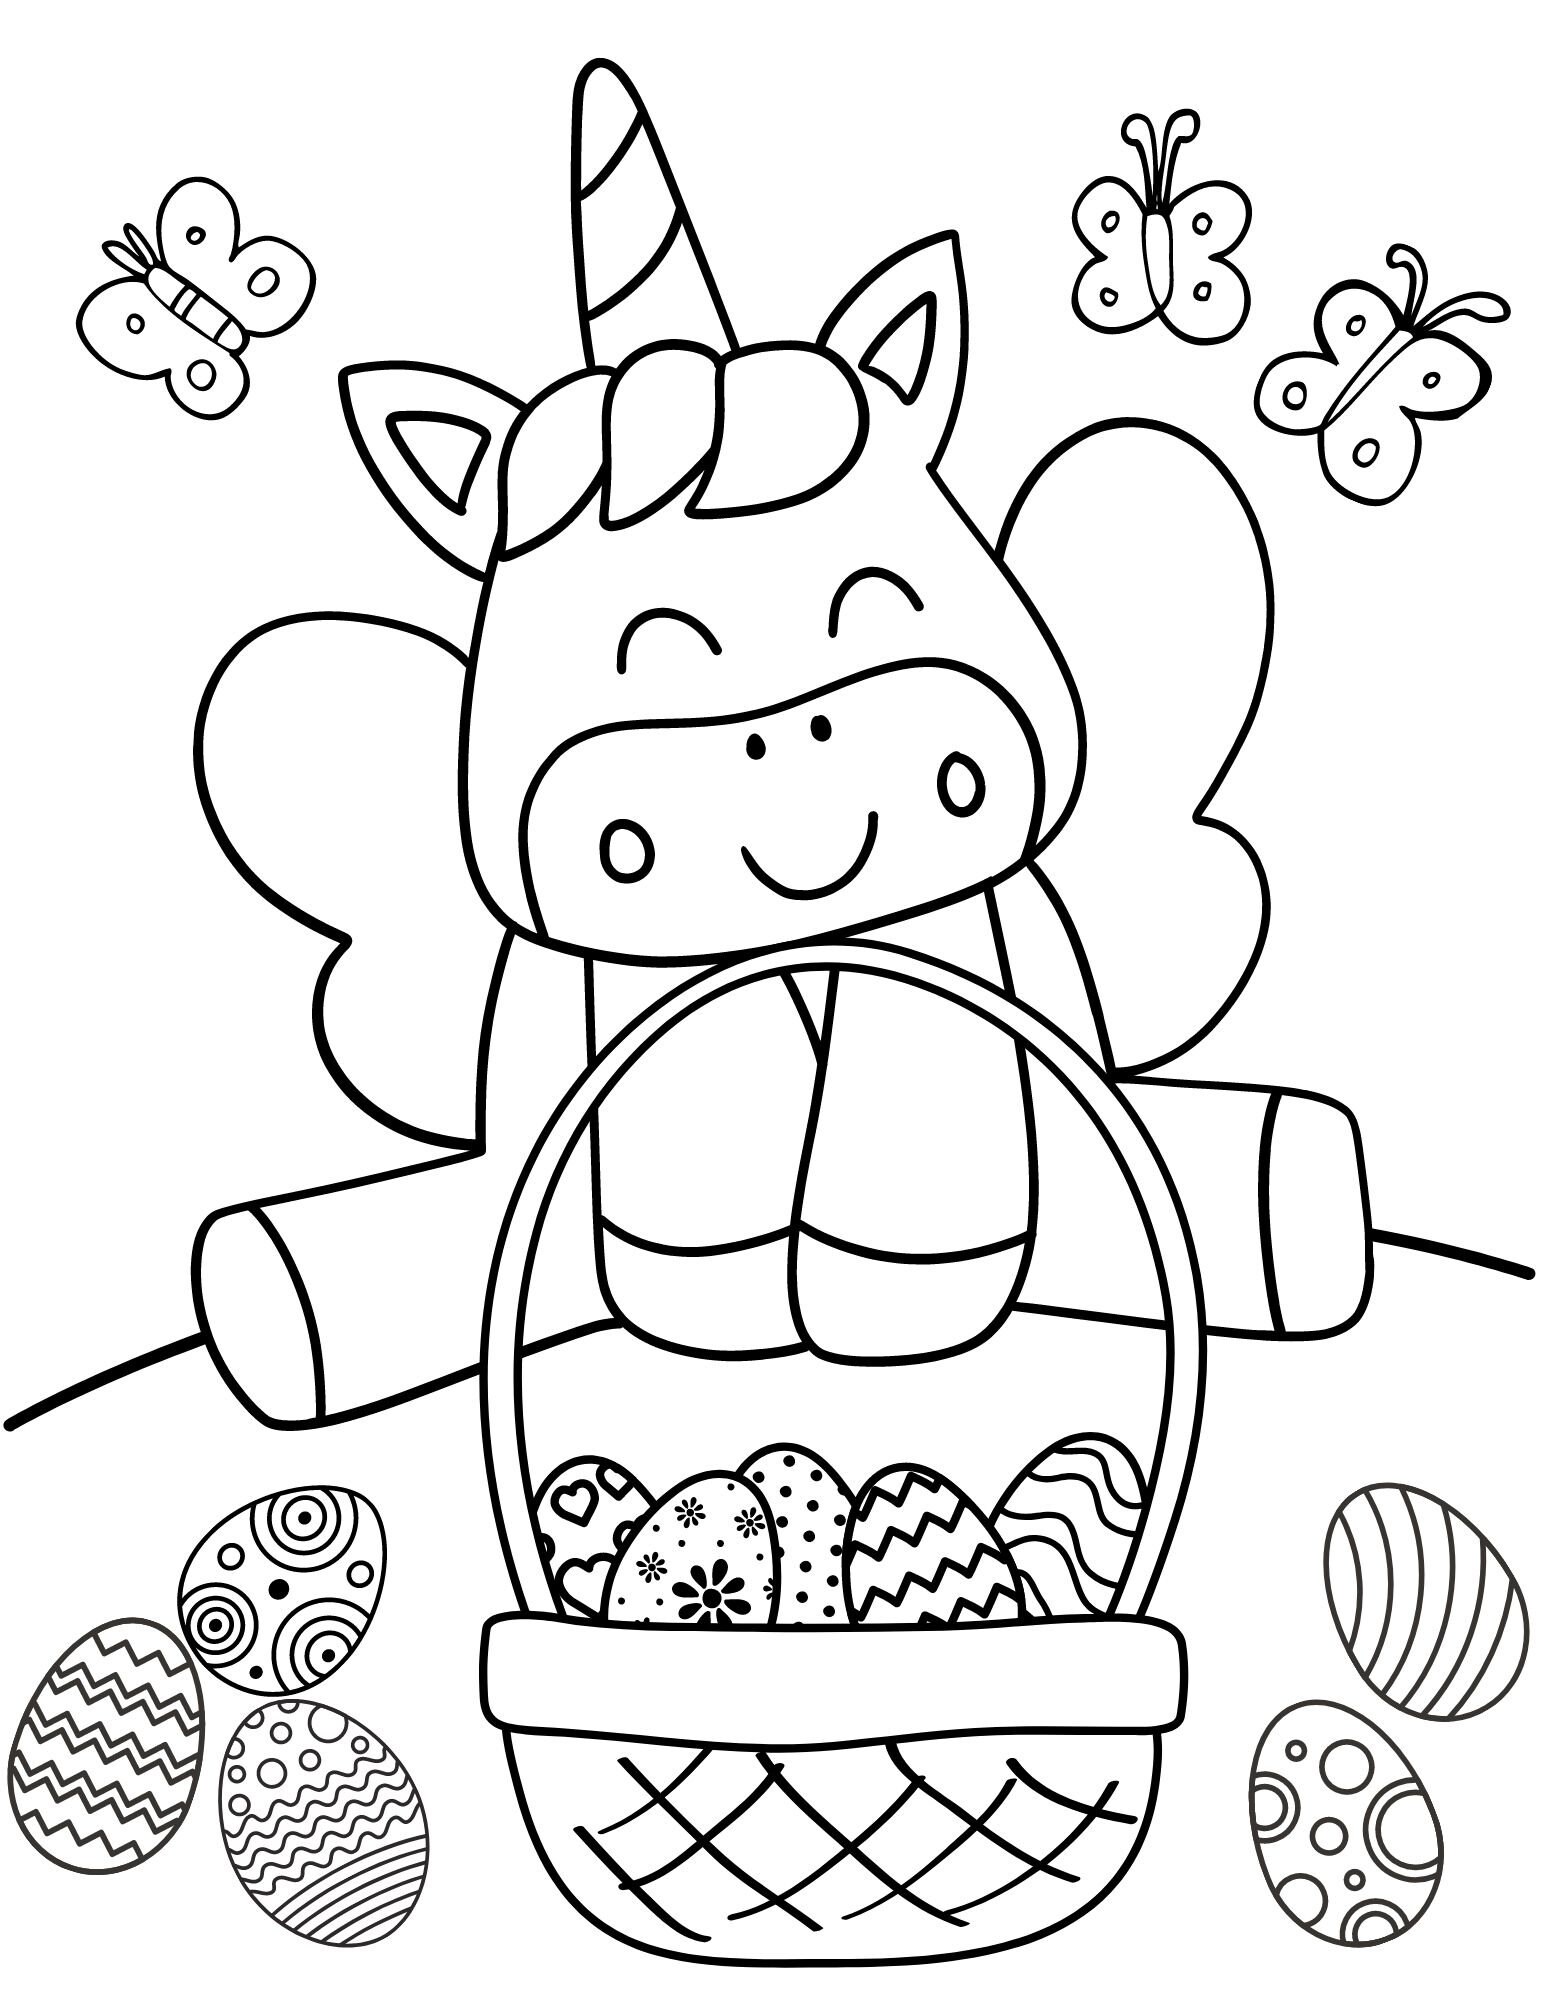 Unicorn easter coloring pages easter coloring easter printables unicorn coloring pages good friday coloring pages easter activity page